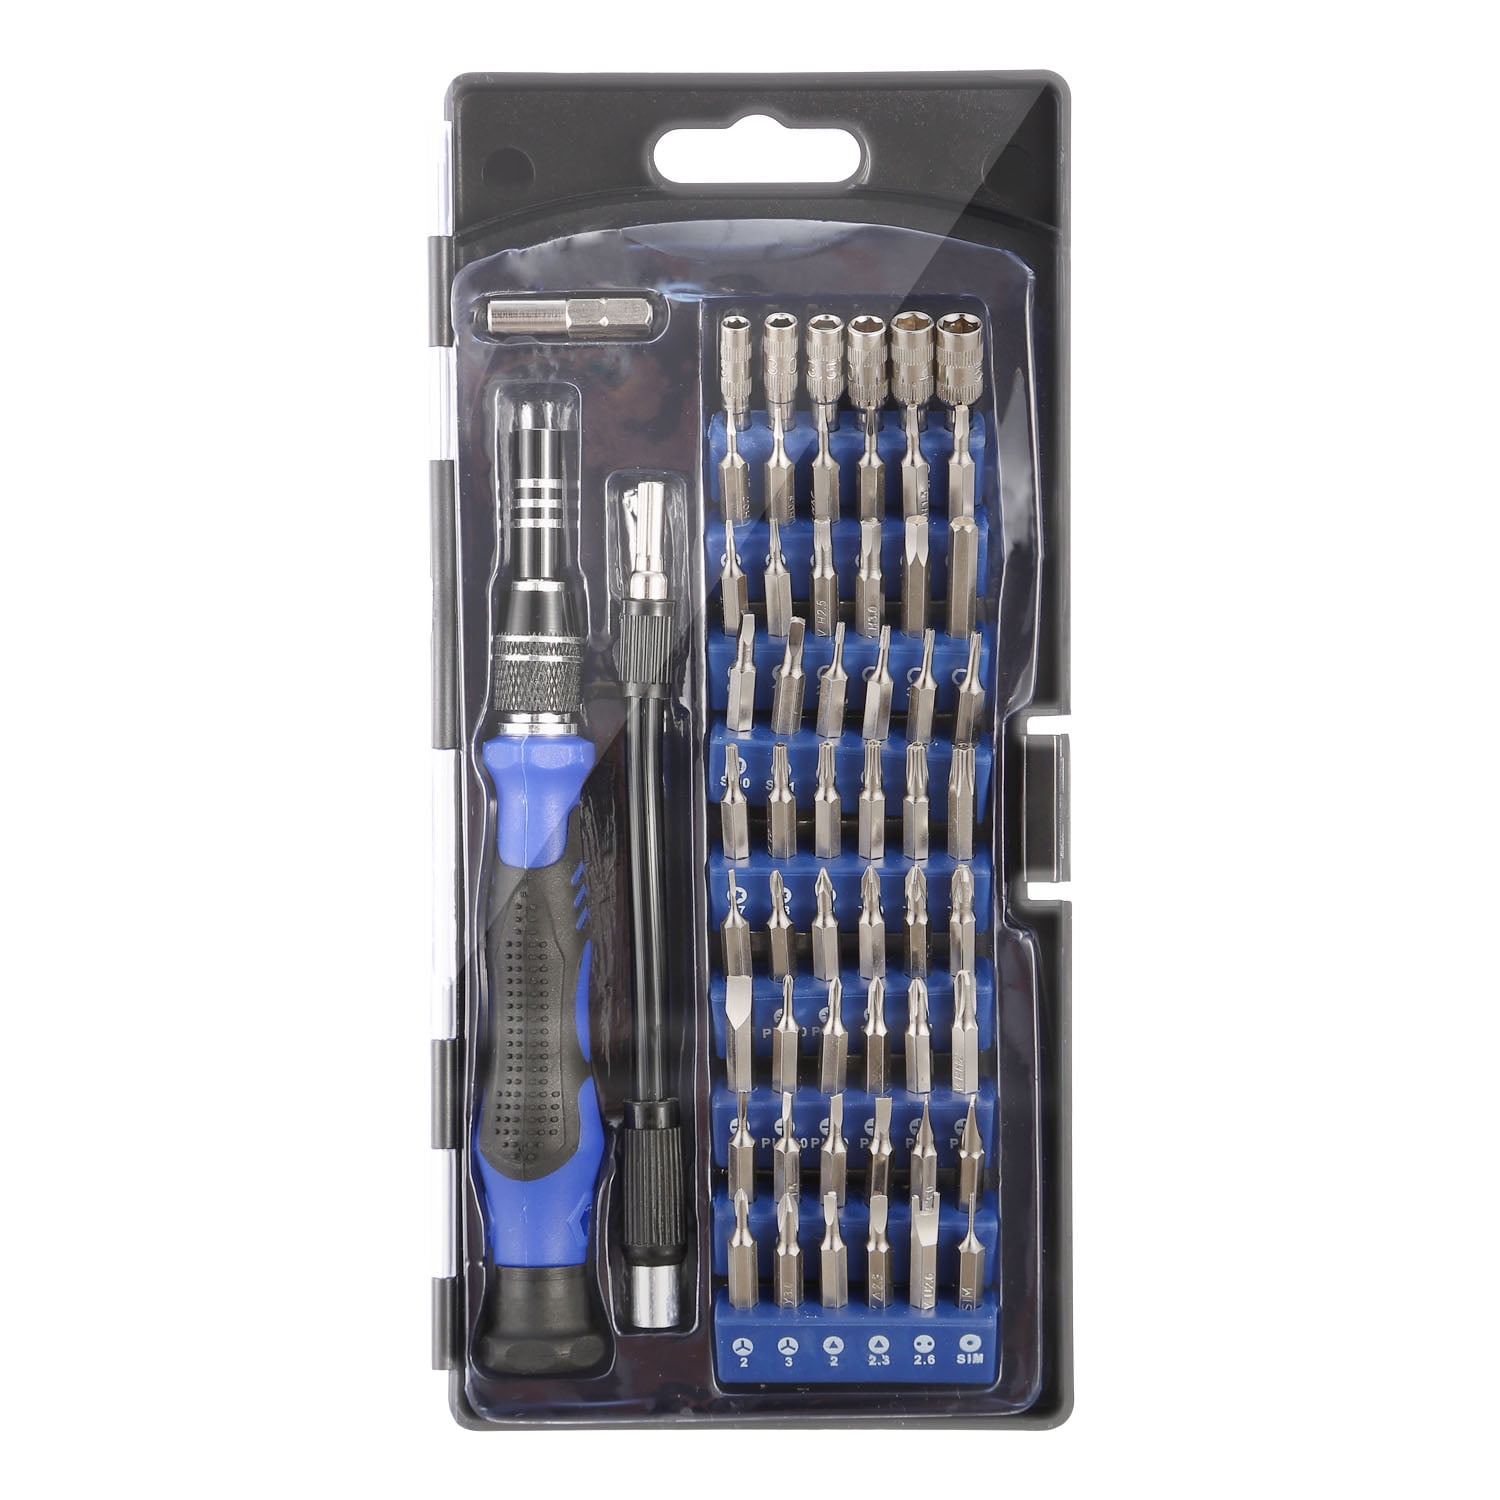 Details about   Domom 20 Pcs Drill Driver Screwdriver Set High Speed Alloyed Steel "60%OFF"" 